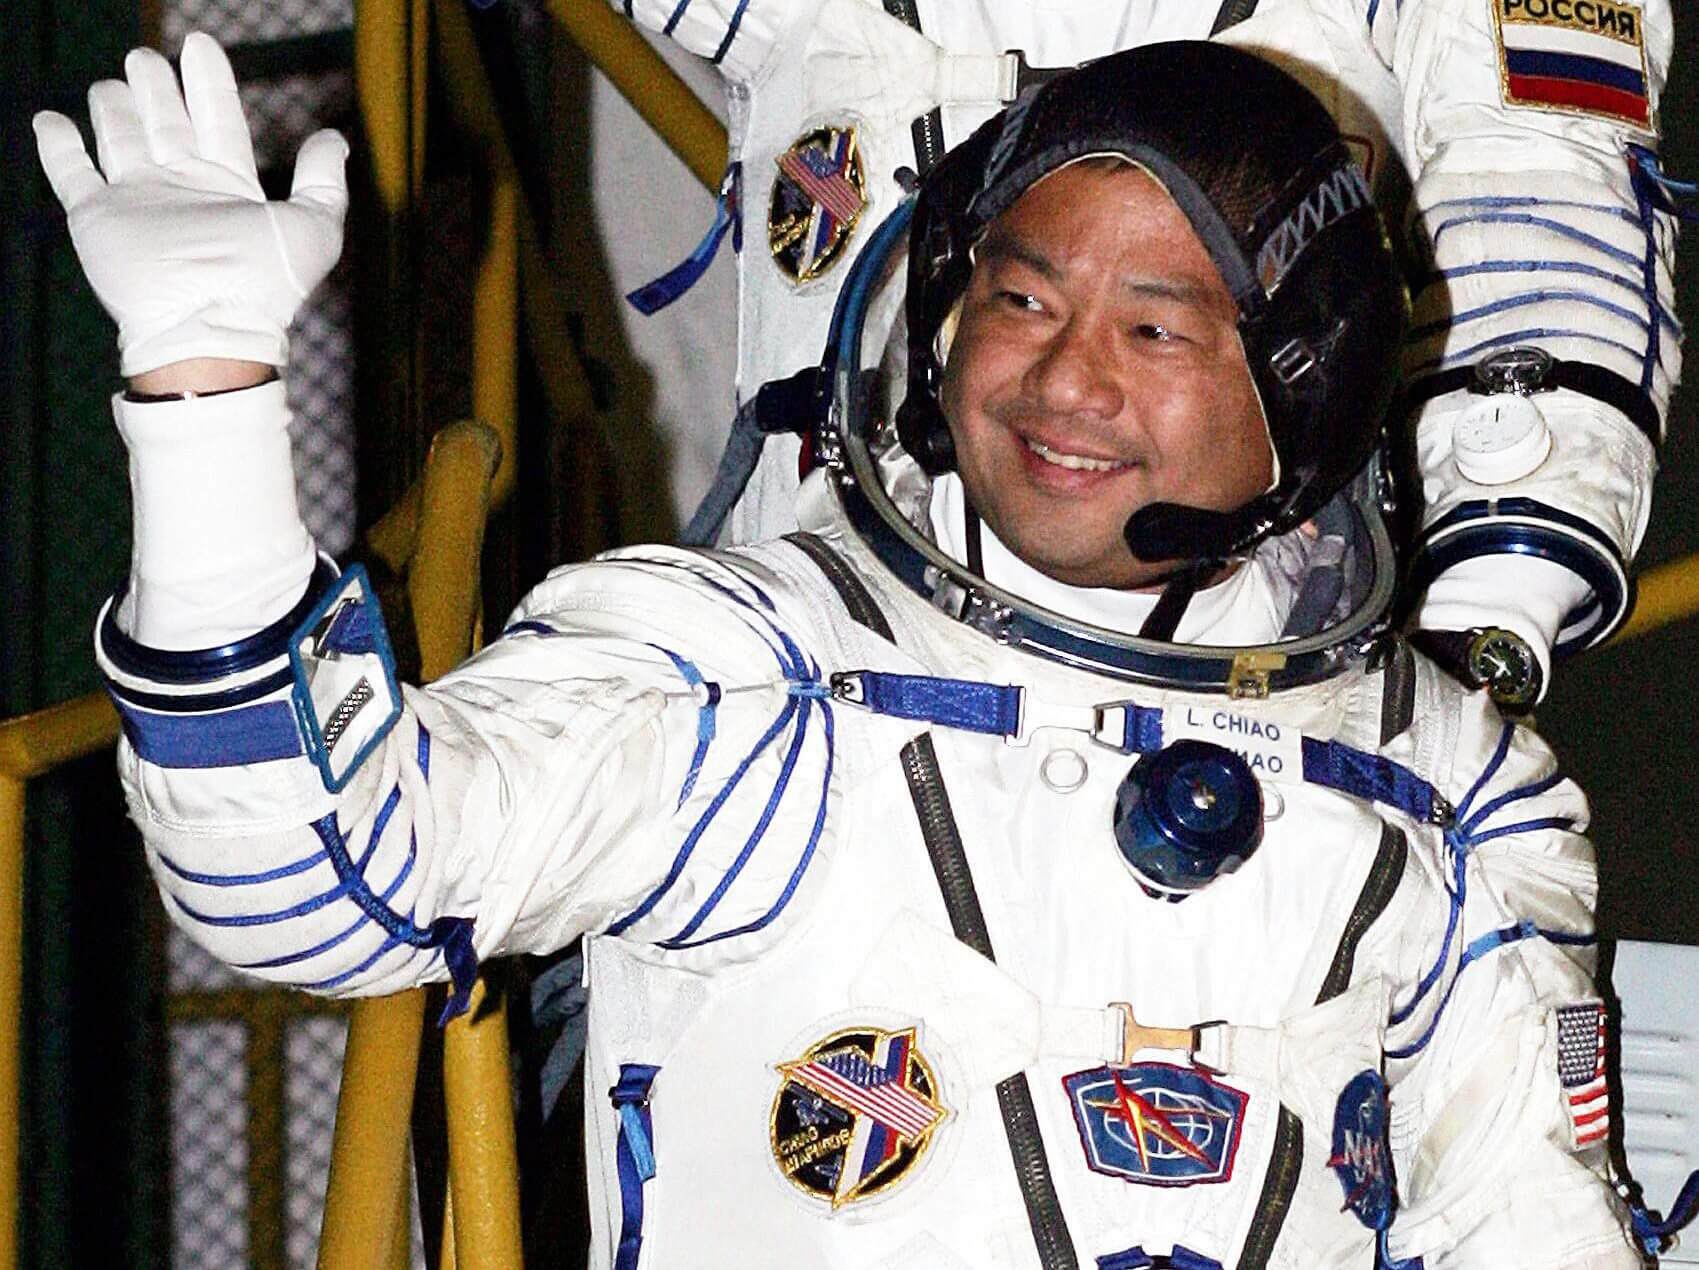 Leroy Chiao pictured in 2004 as he prepares to blast off to the International Space Station. Credit: Getty Images